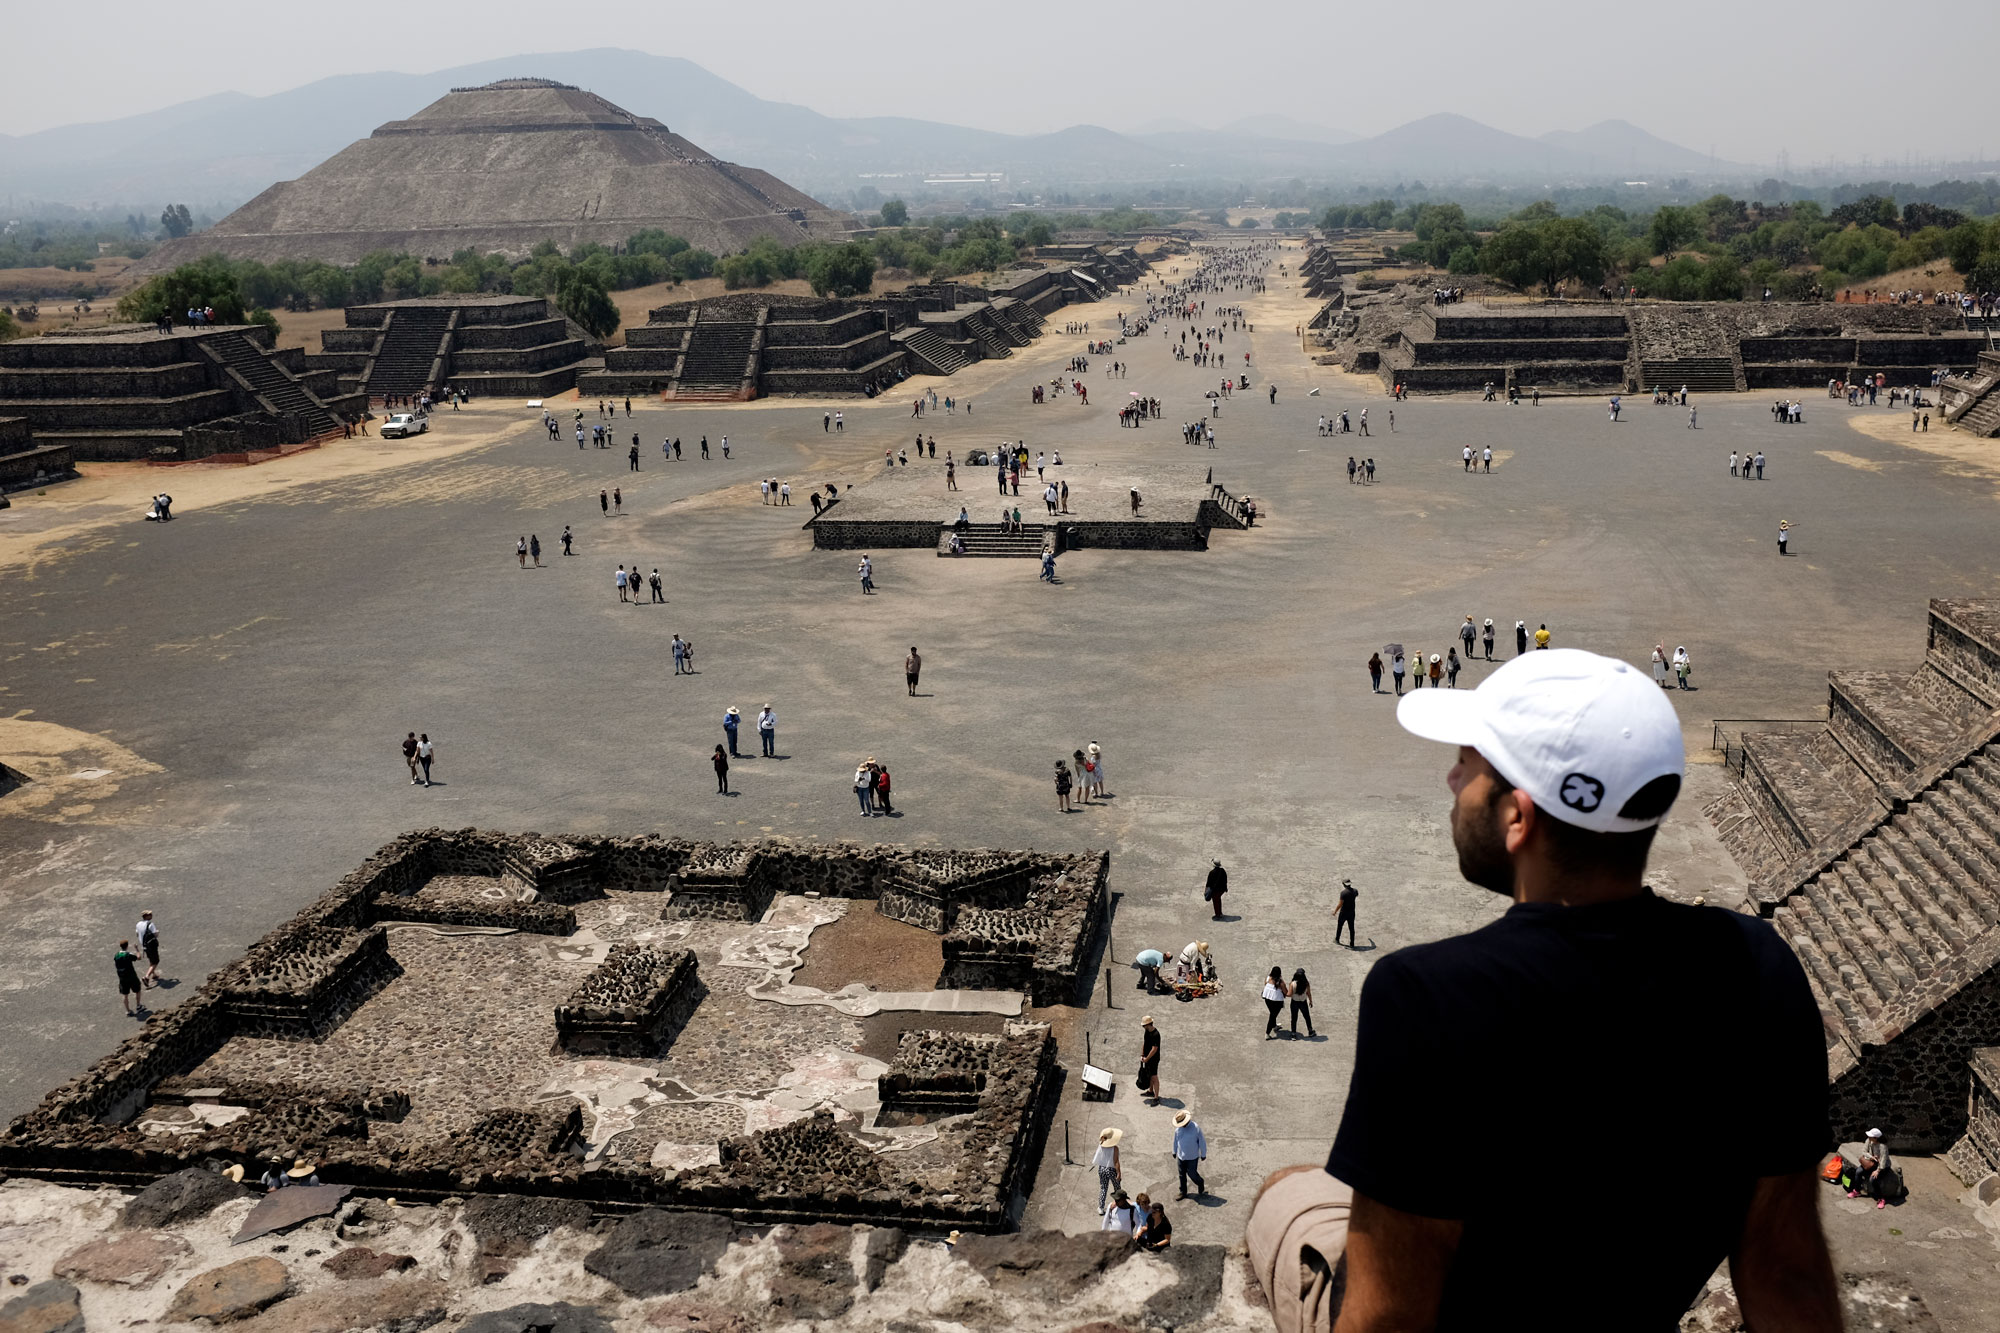 Michael looking over teotihuacan from the pyramid of the moon